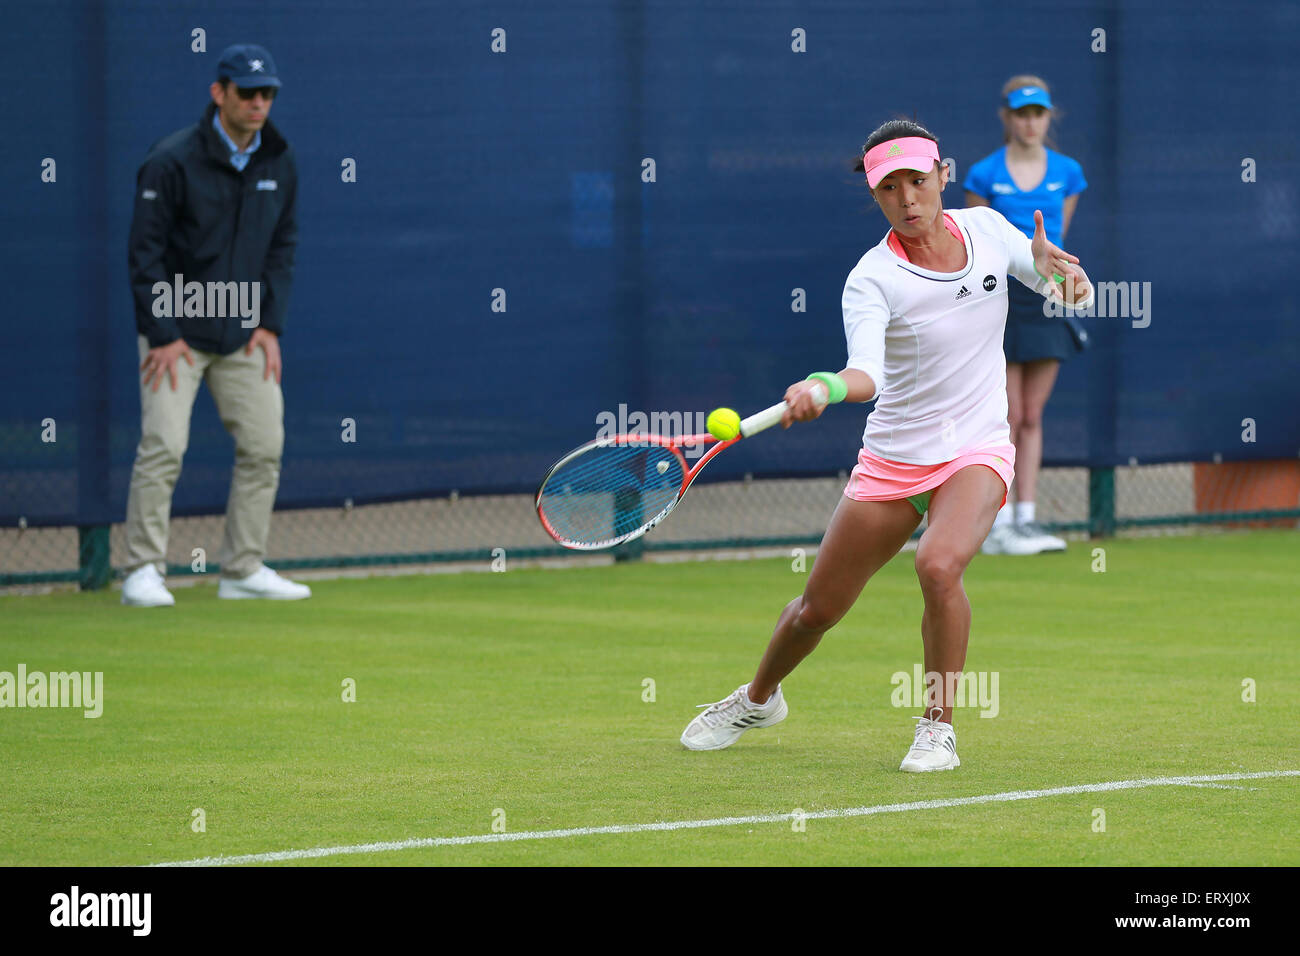 09.06.2015.  Nottingham, England. Aegon Open Tennis. Qiang Wang of China in action in her match against Sachia Vickery of USA Stock Photo